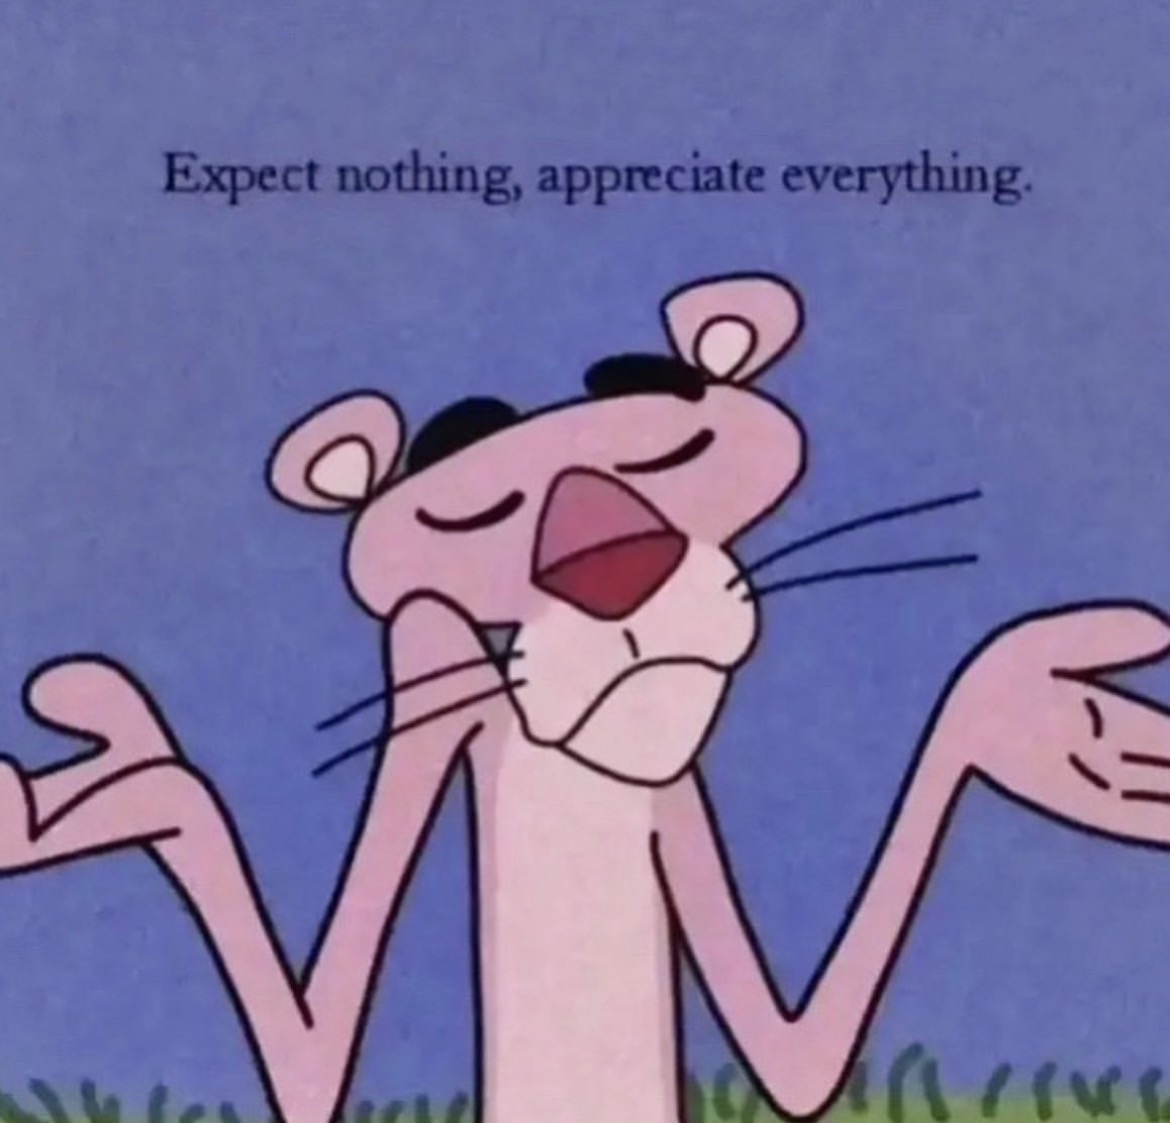 Expect-nothing-appreciate-everything